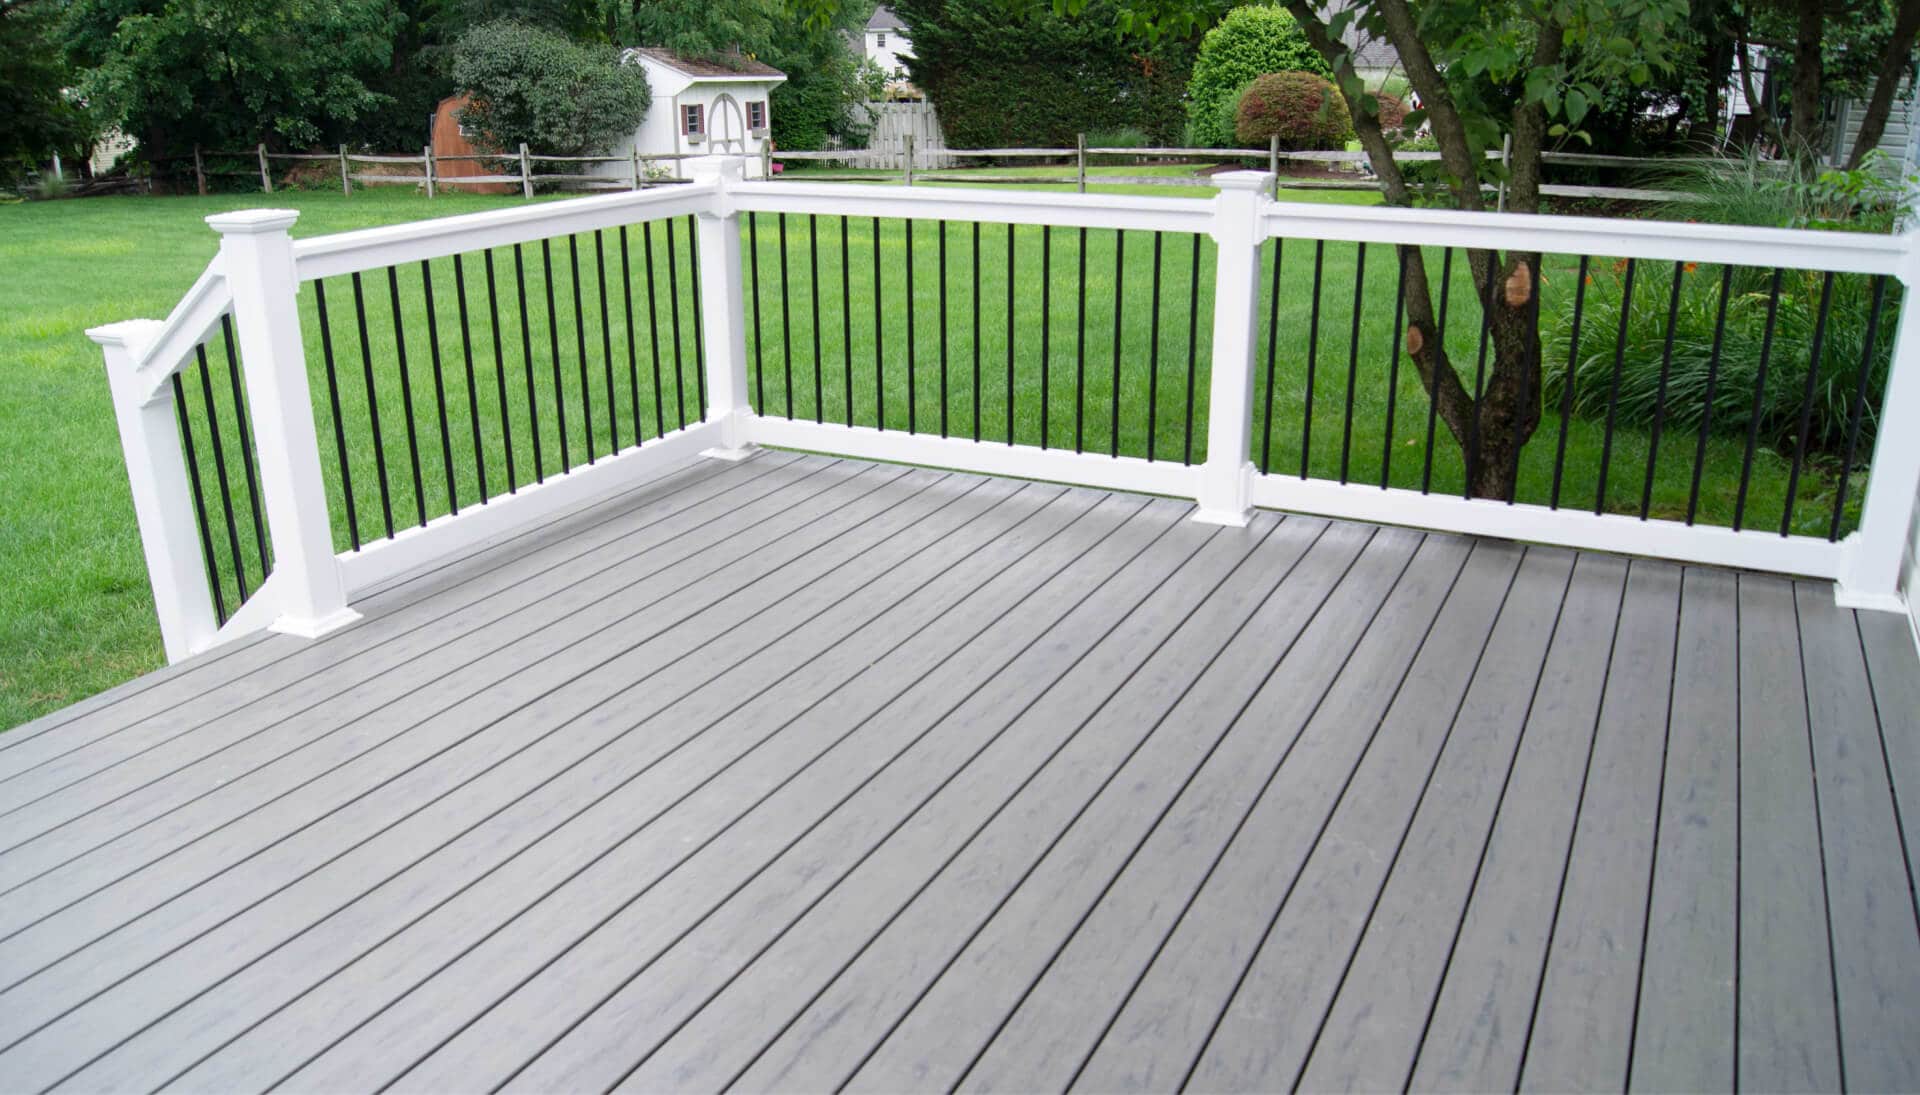 Experts in deck railing and covers Des Moines, IA